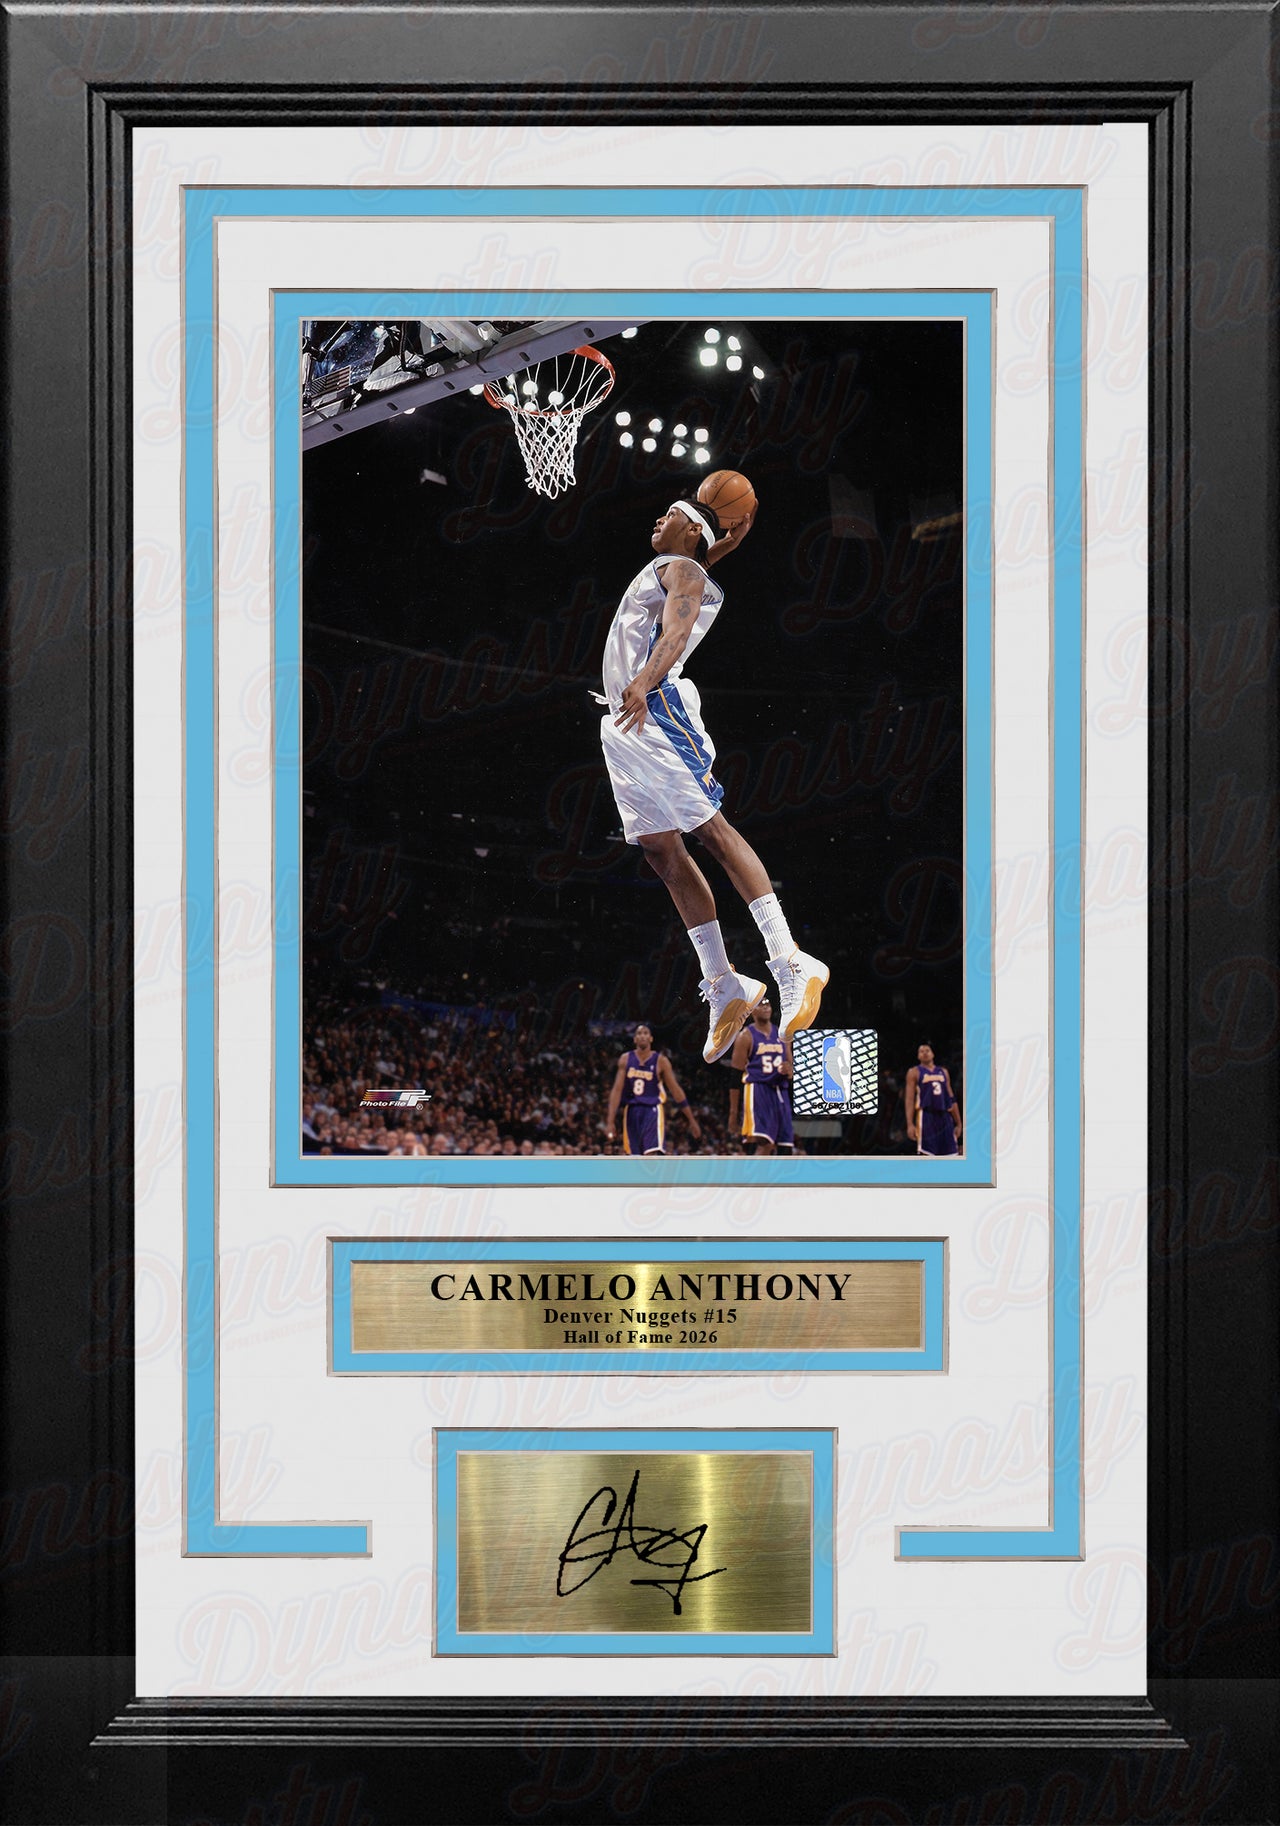 Carmelo Anthony Slam Dunk Denver Nuggets 8x10 Framed Basketball Photo with Engraved Autograph - Dynasty Sports & Framing 